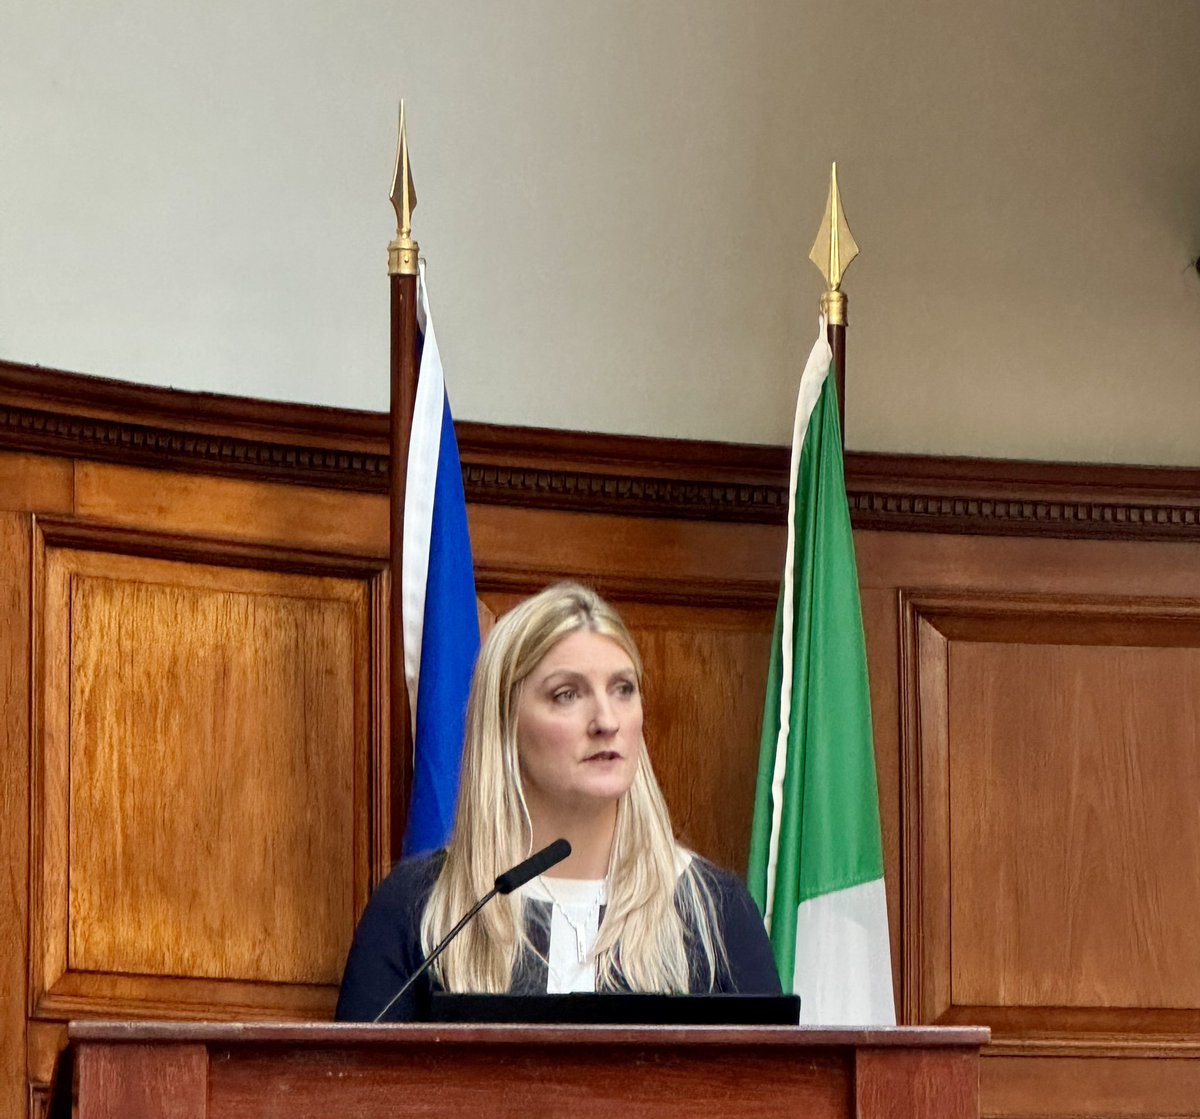 Averil Power, CEO OF @IrishCancerSoc makes a passionate plea for #Ireland to do better for Patients with cancer. Calls for full implementation of Irish cancer strategy